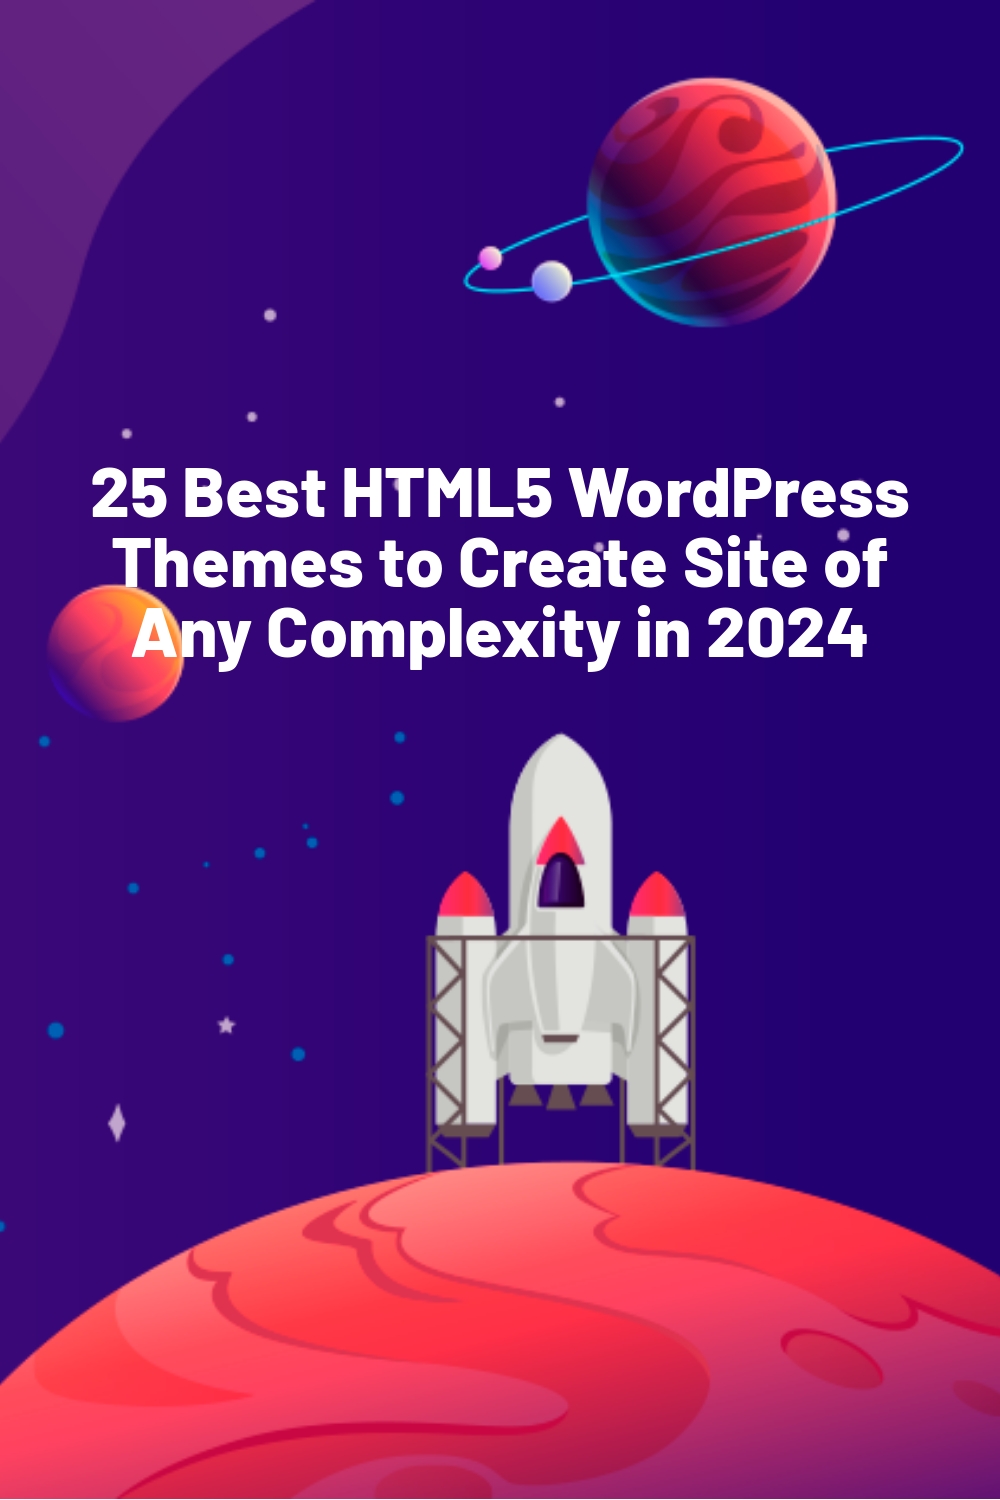 25 Best HTML5 WordPress Themes to Create Site of Any Complexity in 2024